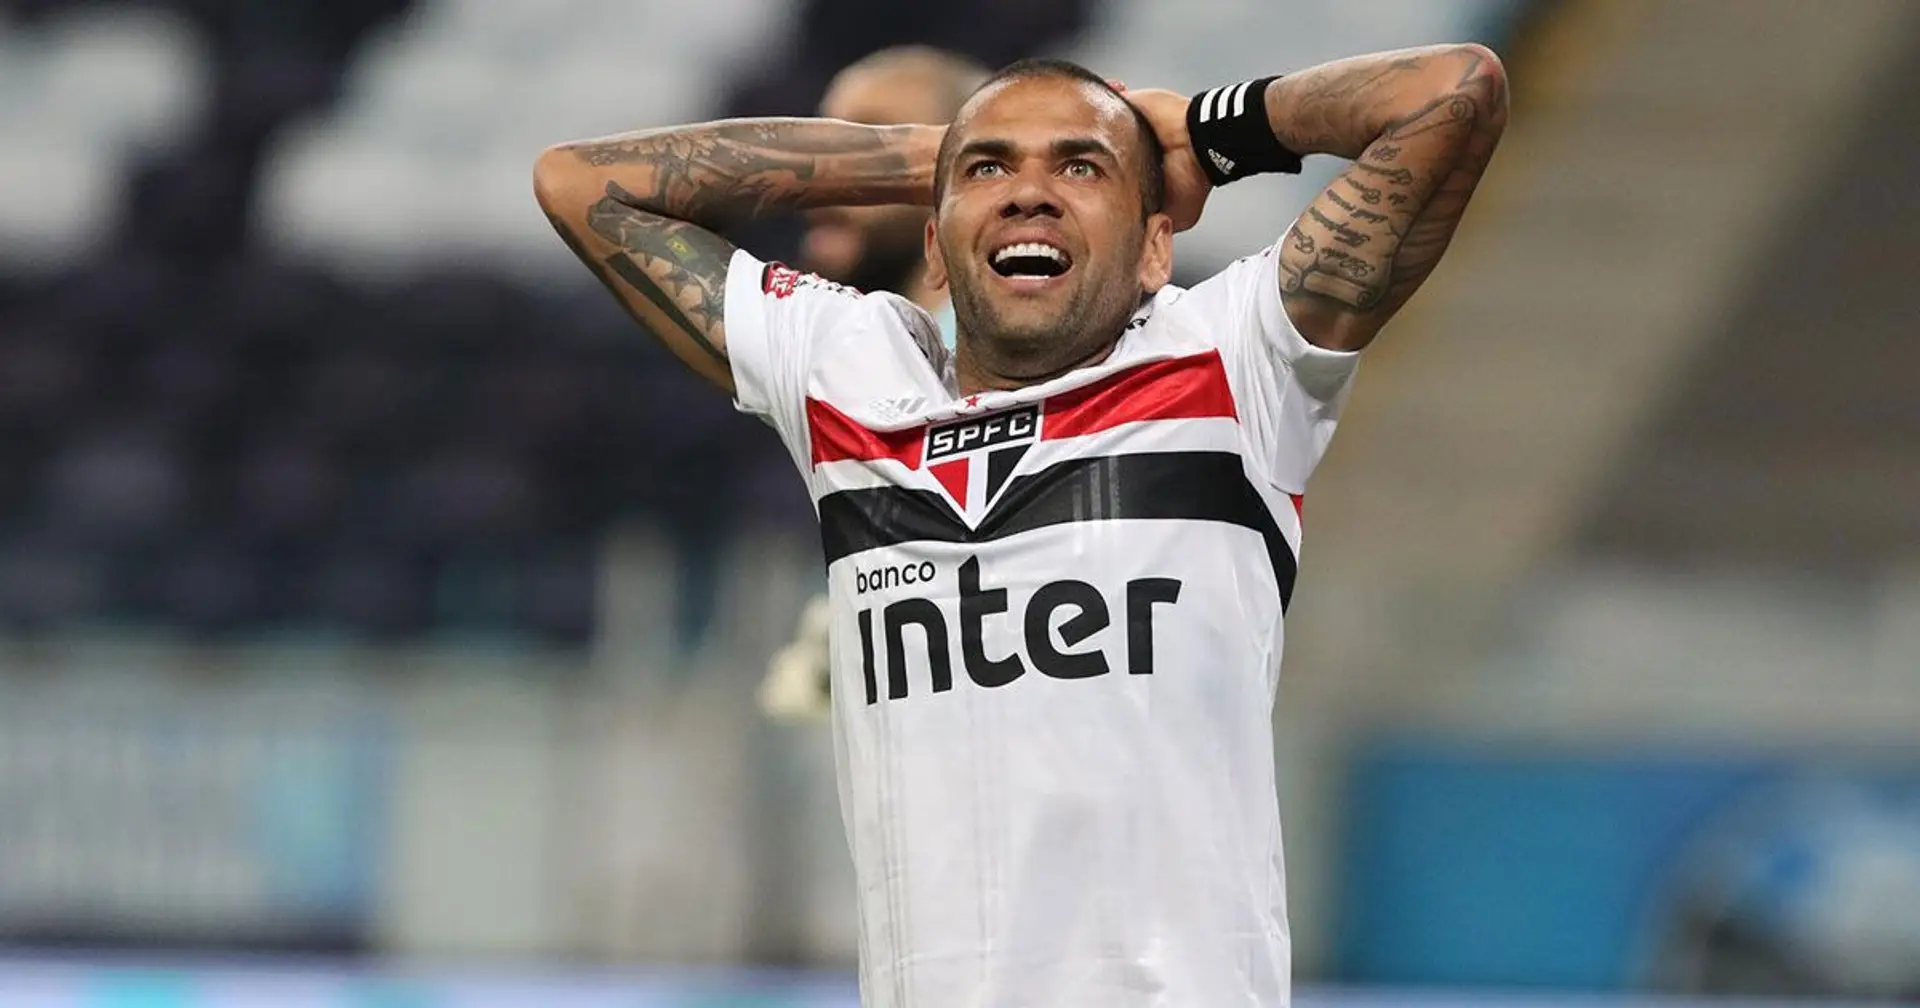 Dani Alves confirms he'll remain free agent until end of 2021 after leaving Sao Paulo